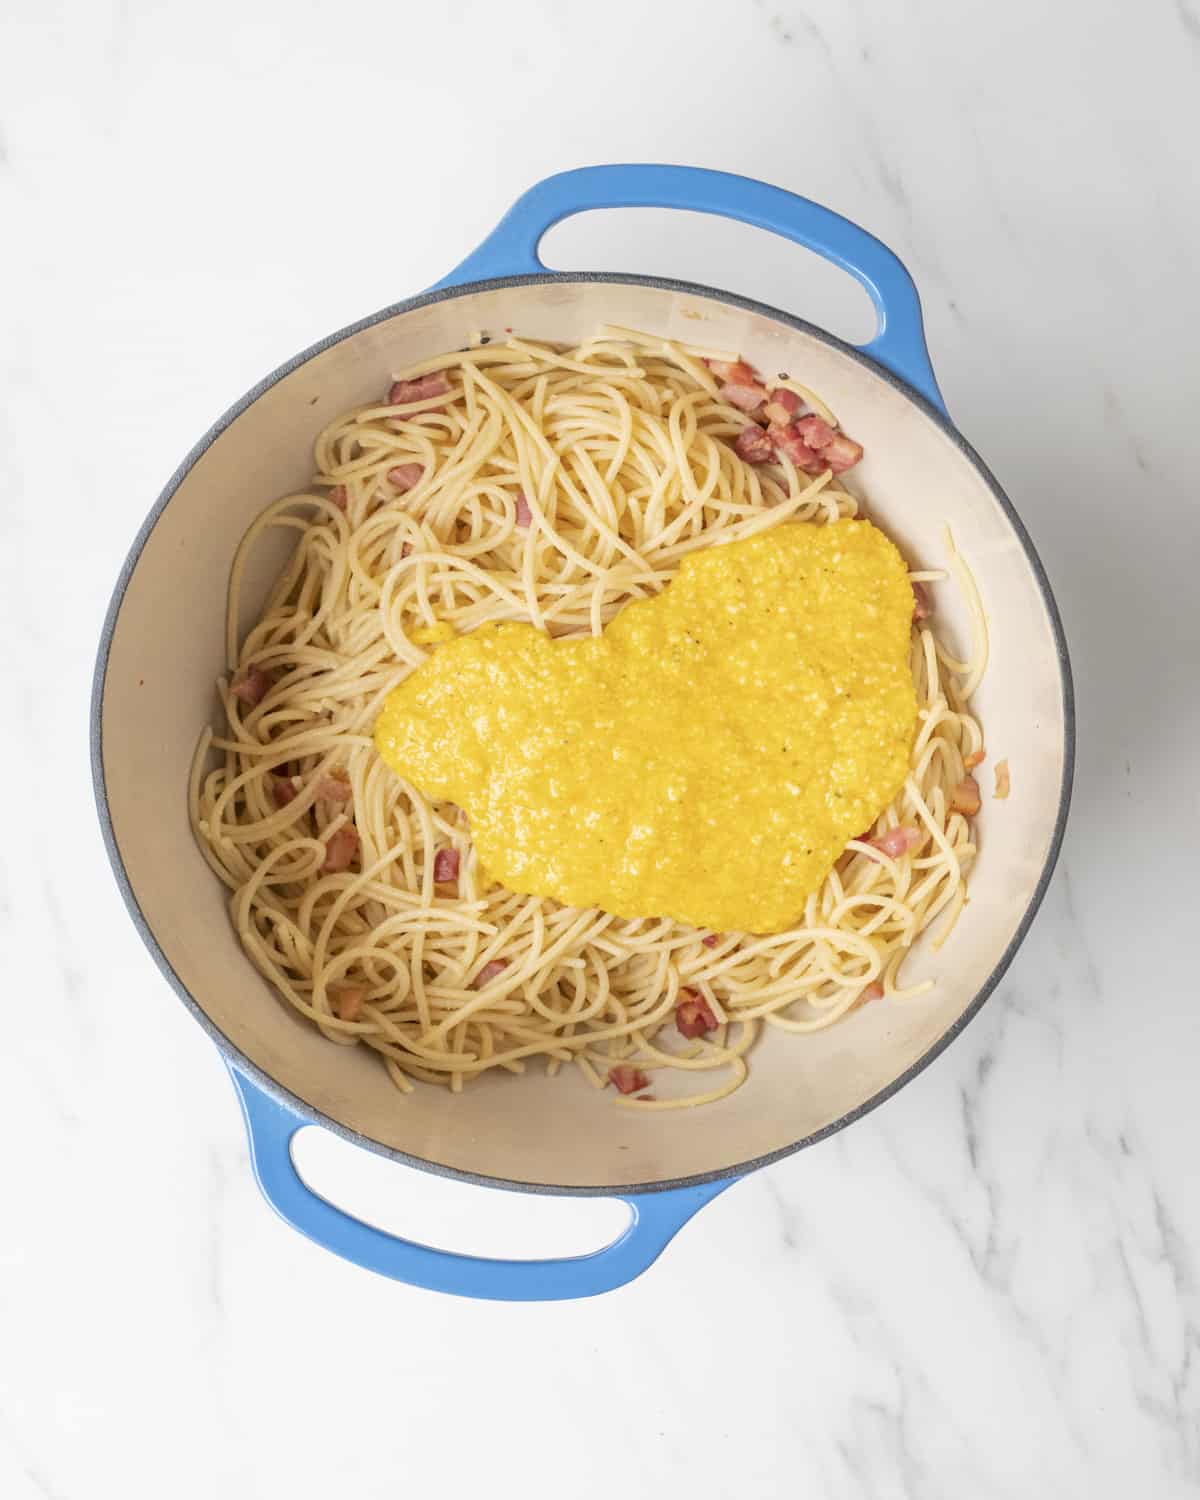 A blue Dutch oven skillet with cooked spaghetti noodles and pancetta topped with the egg mixture.